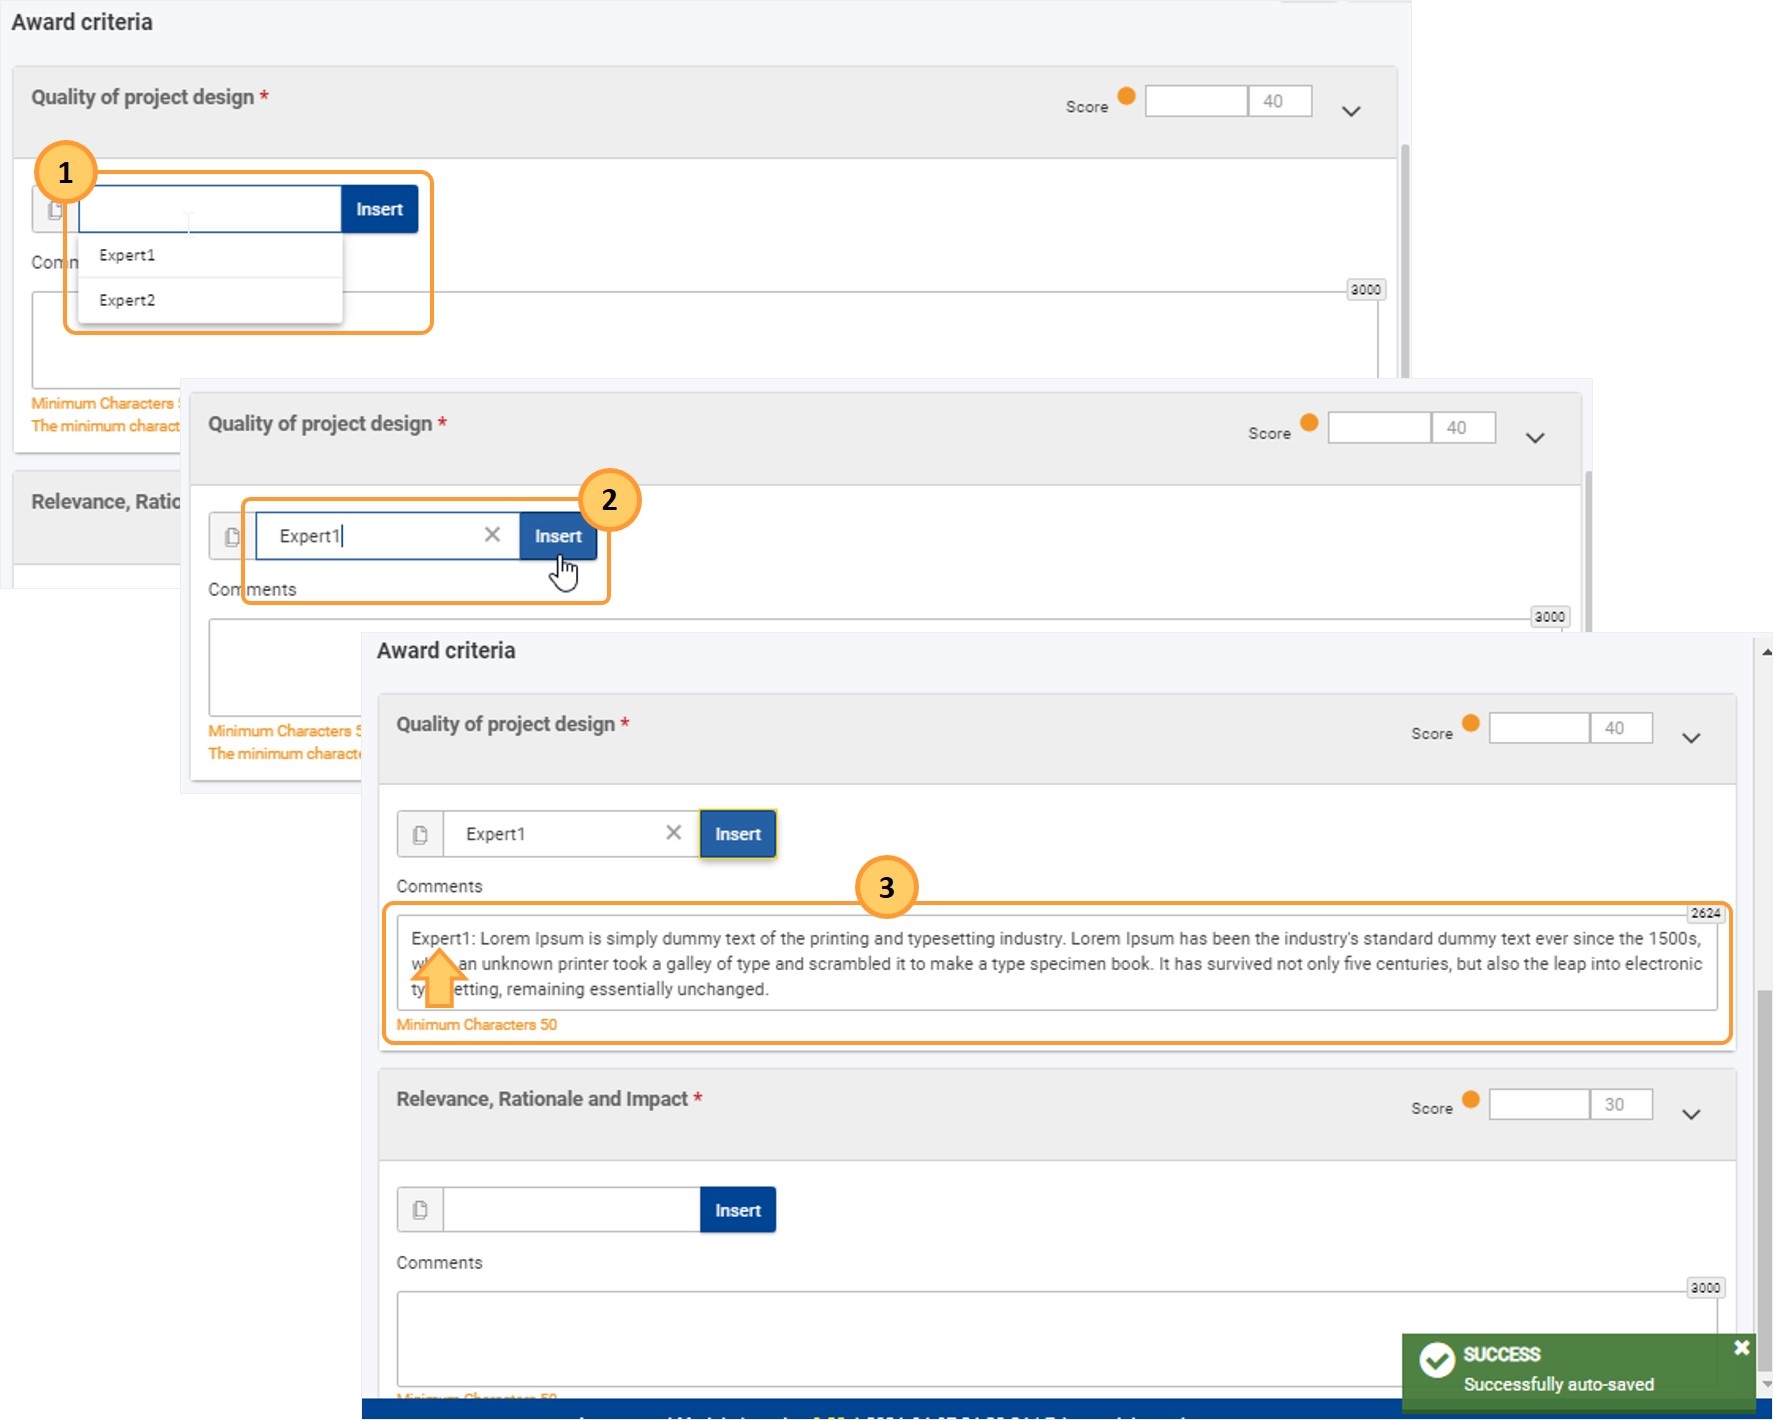 Complete all available Comments fields under Award criteria using the Insert functionality